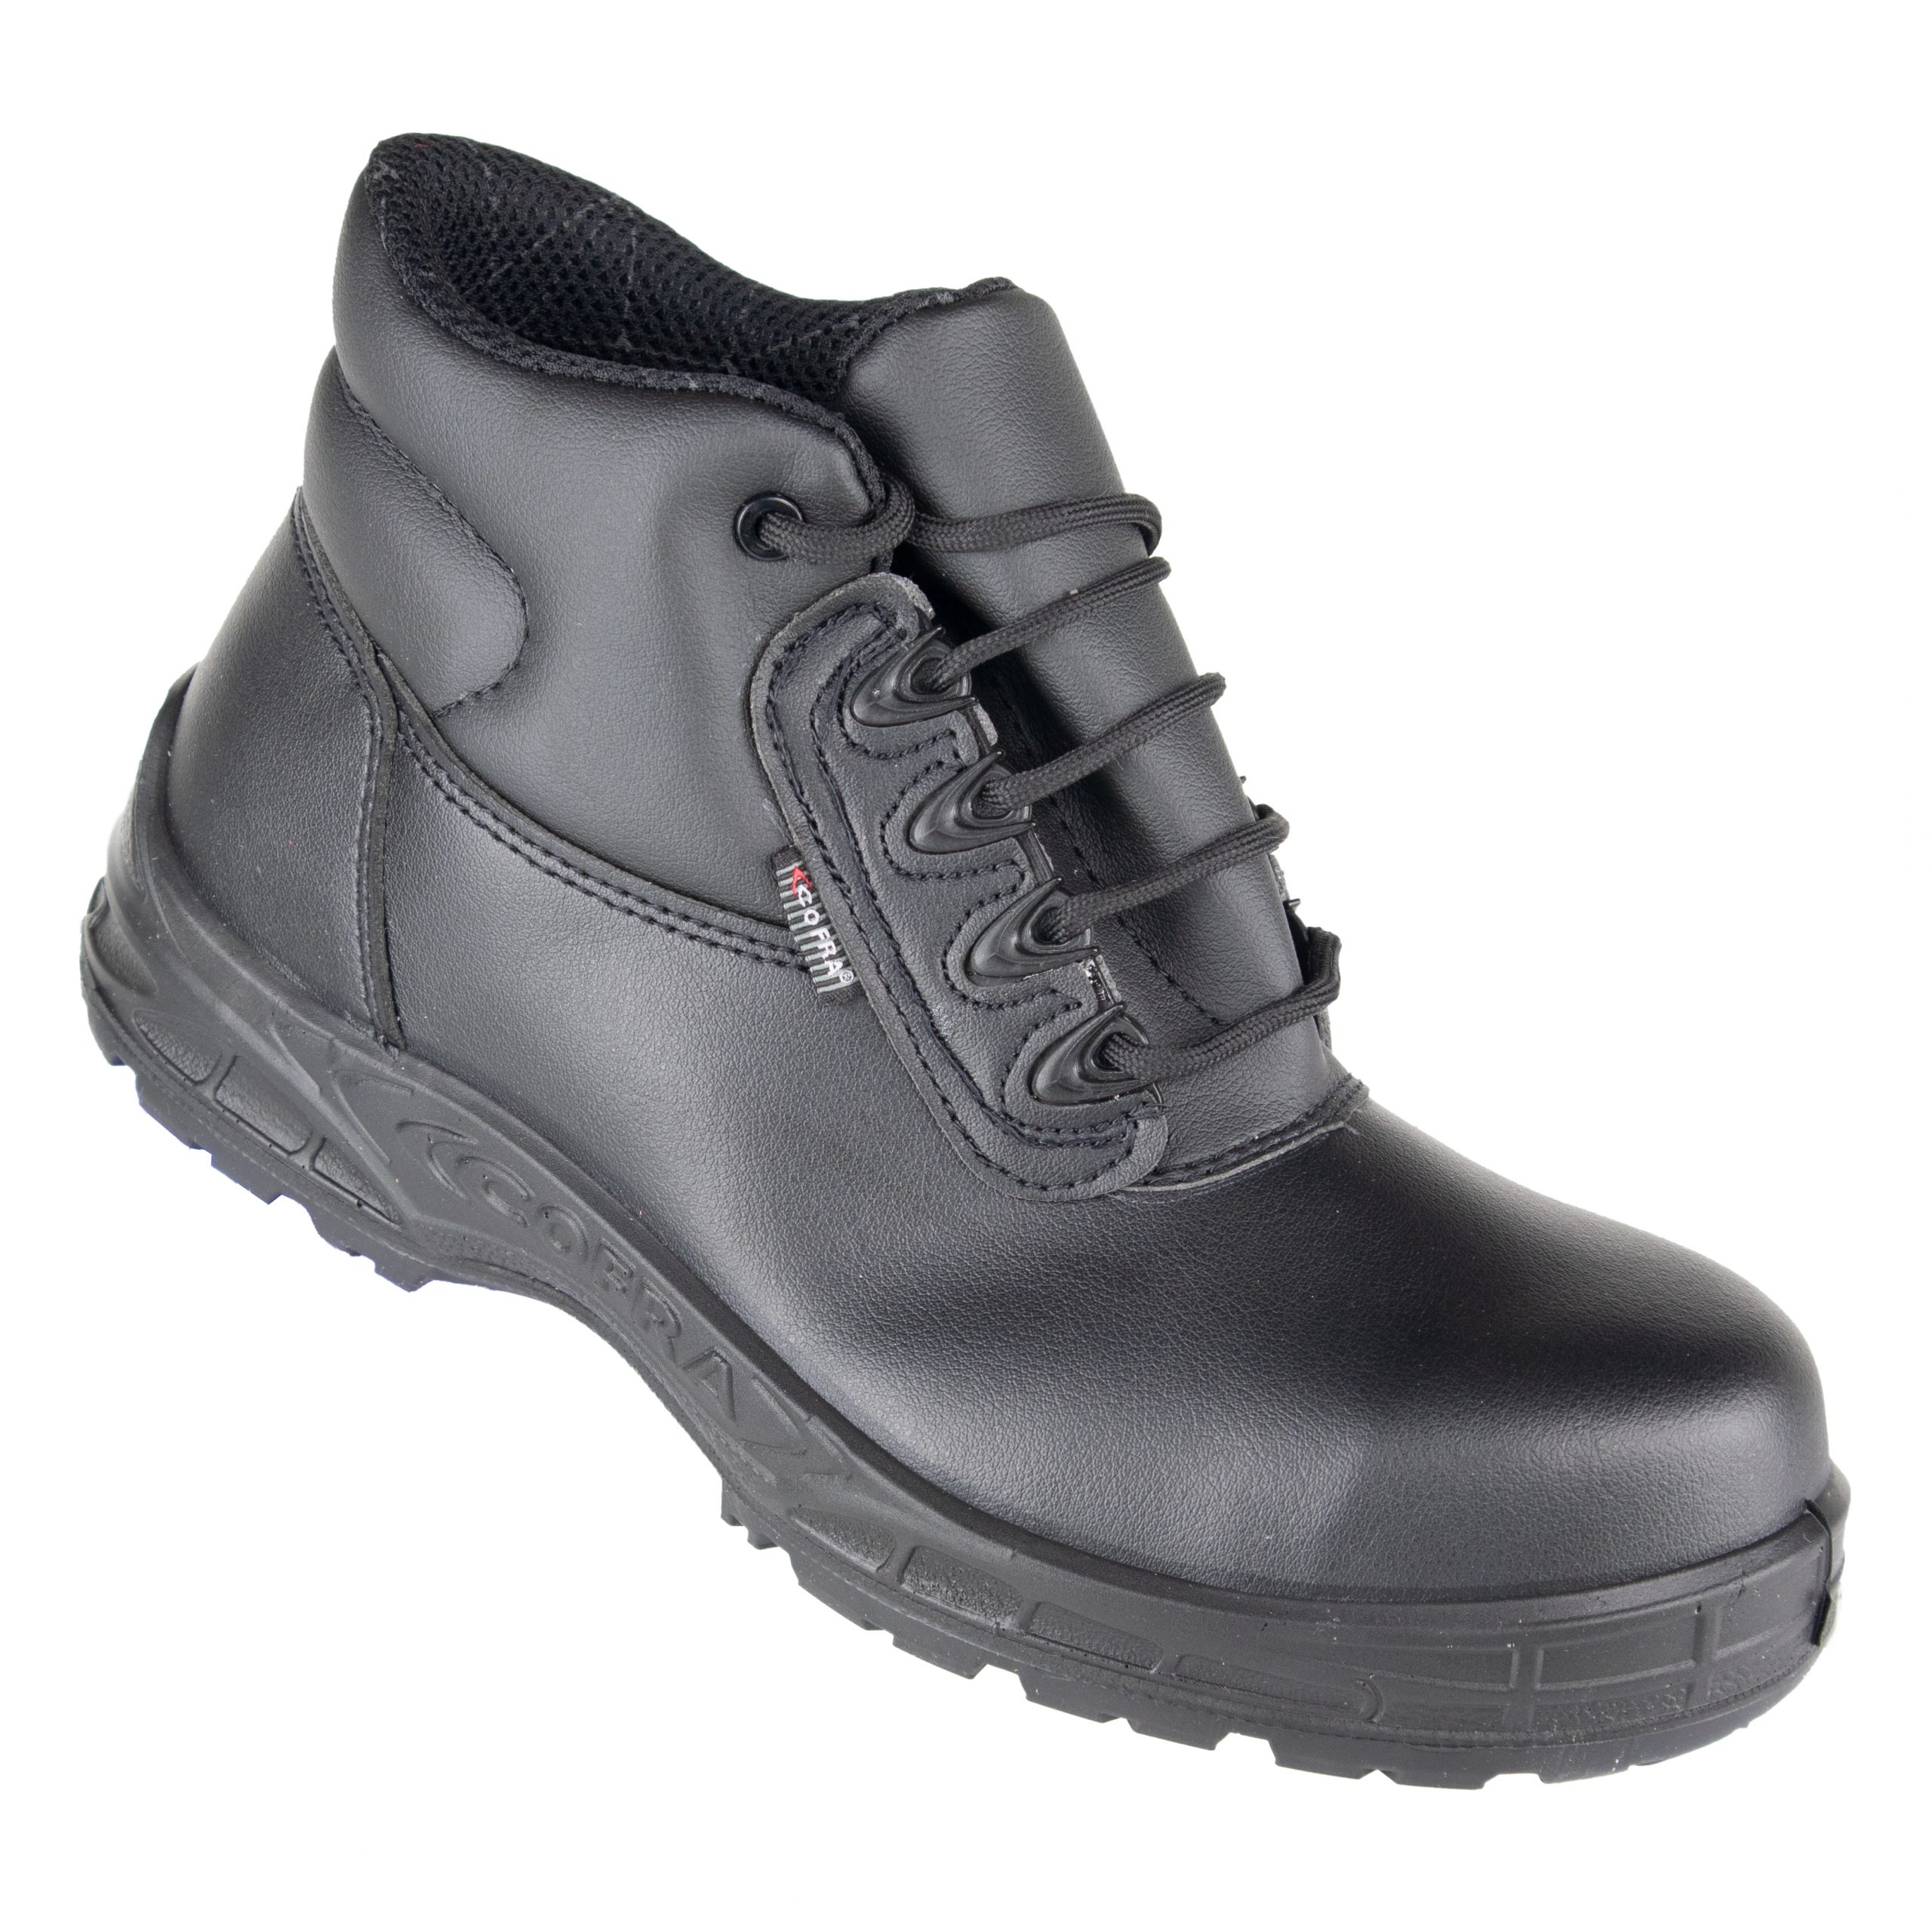 Himalayan 'Lorica' 9404 Waterproof Composite Black Safety Boot